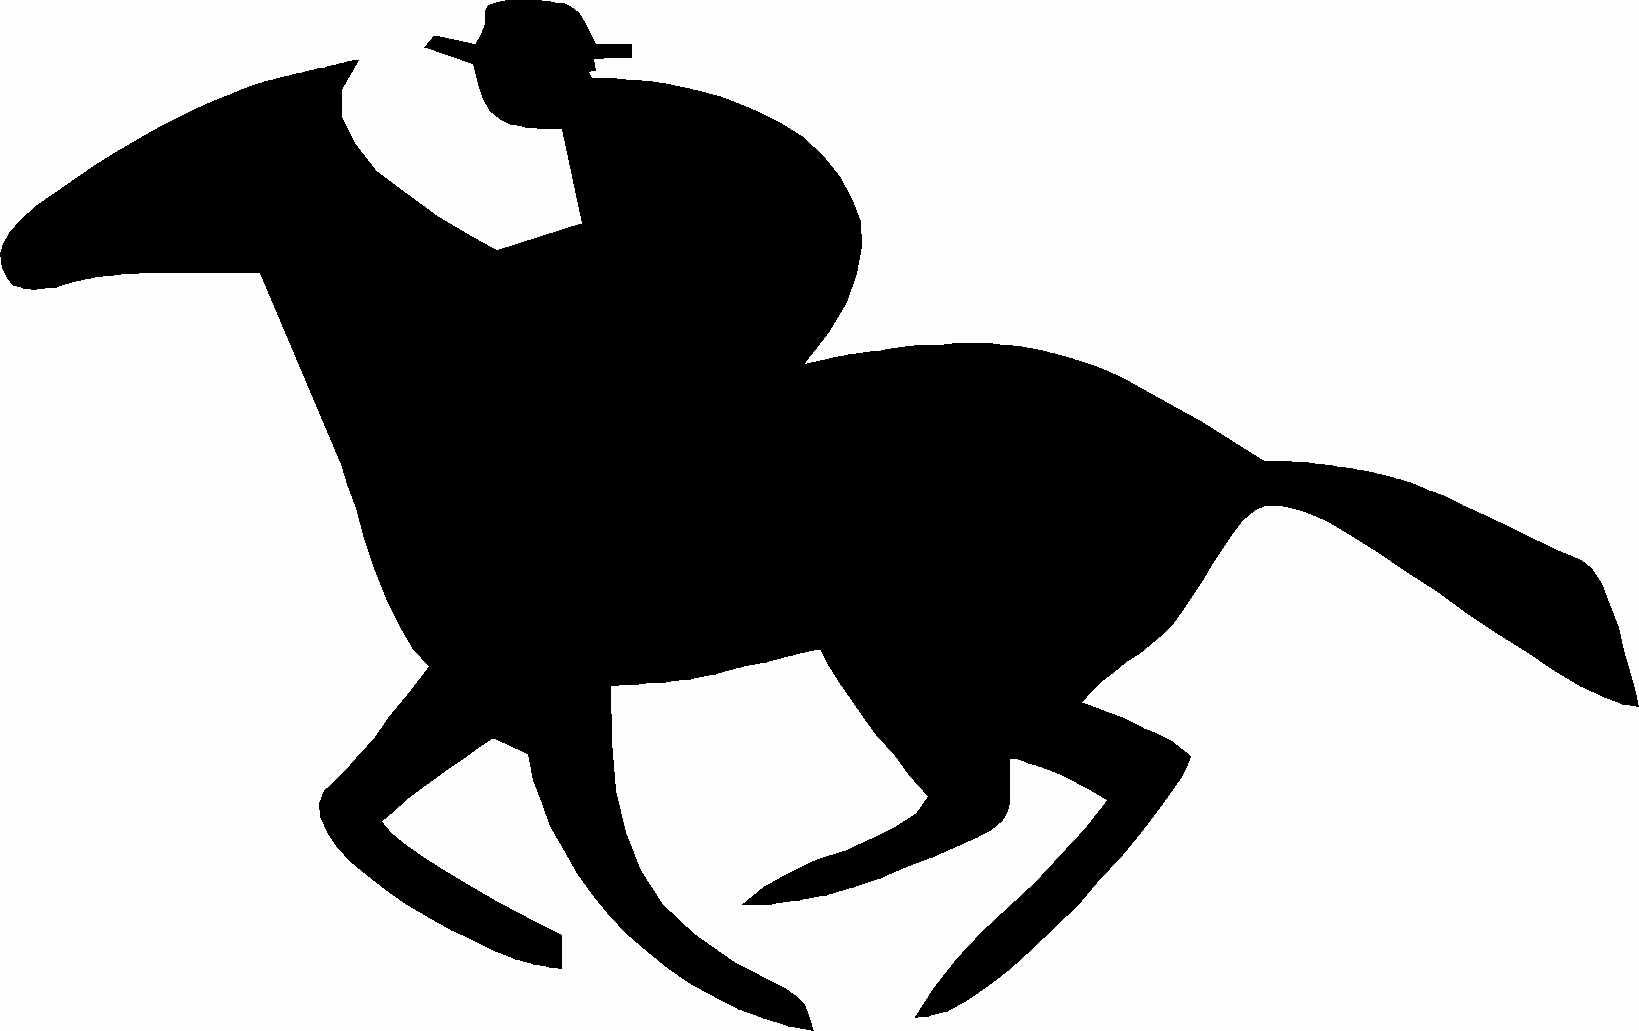 Seabiscuit  other horse racing clip art at Virtual Horse Graphics